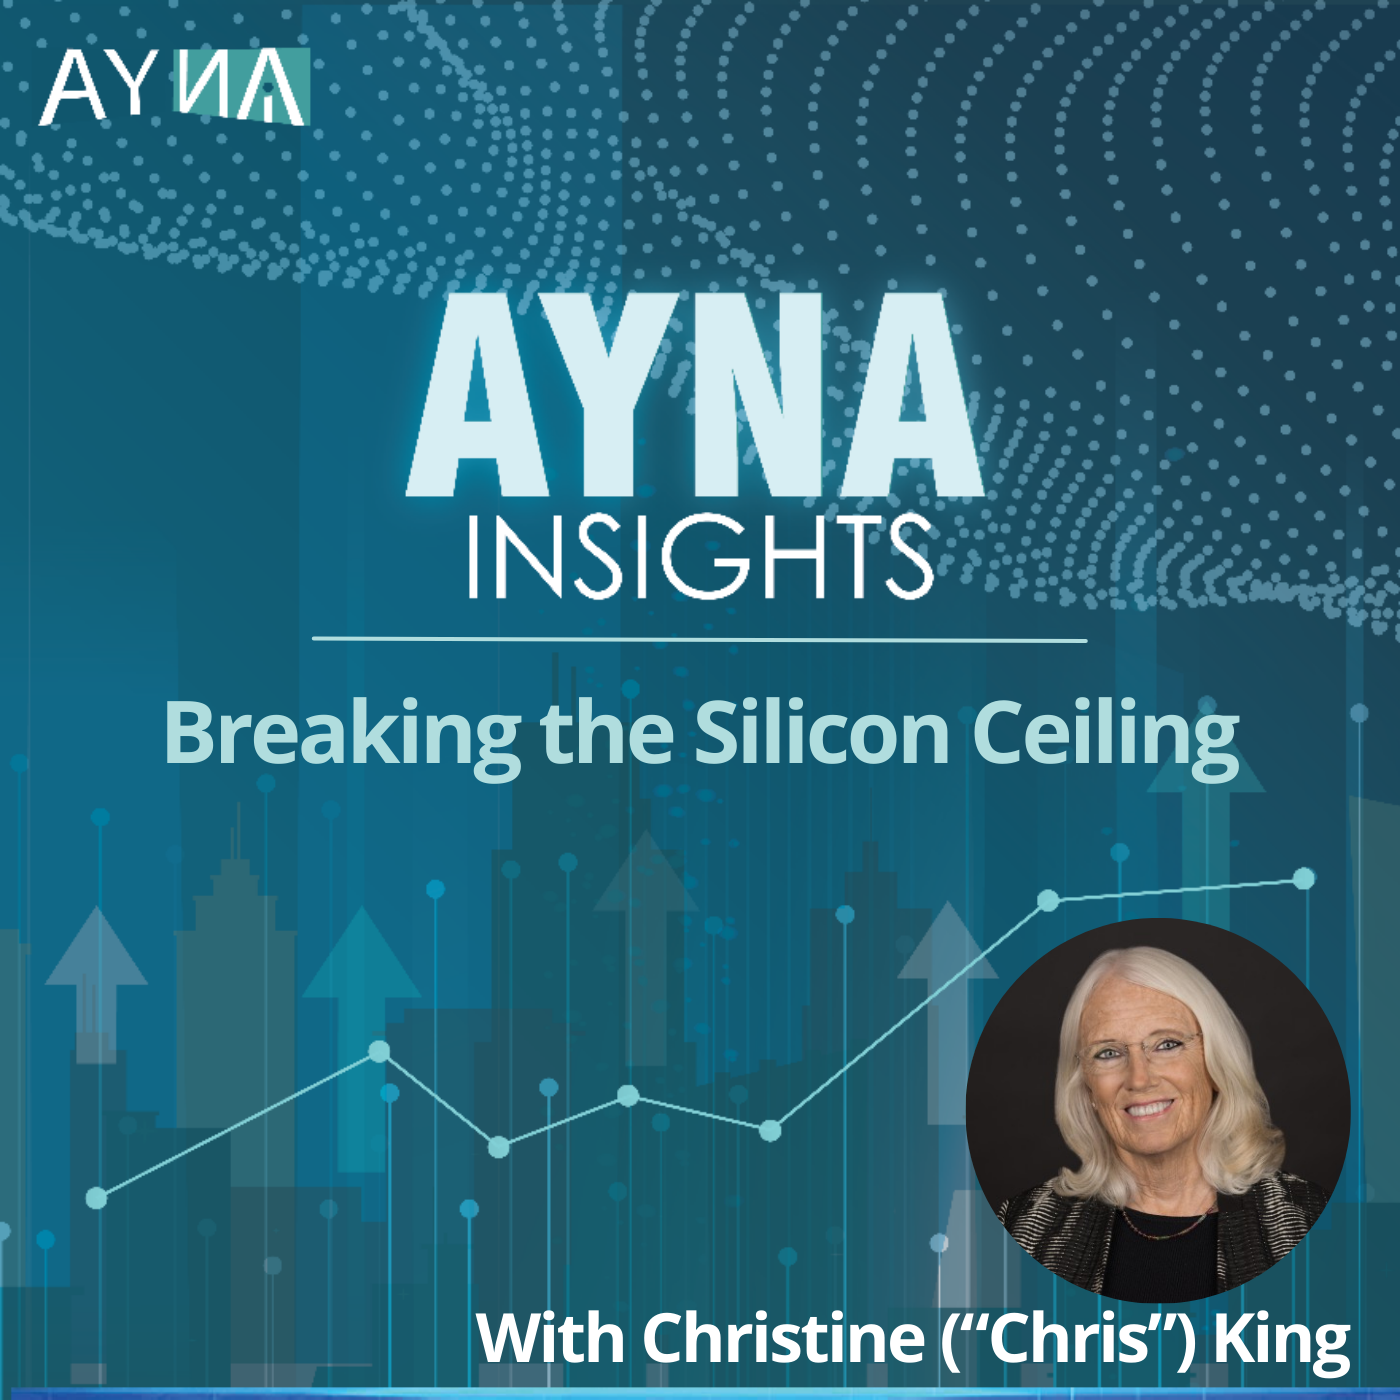 Christine (“Chris”) King: Breaking the Silicon Ceiling